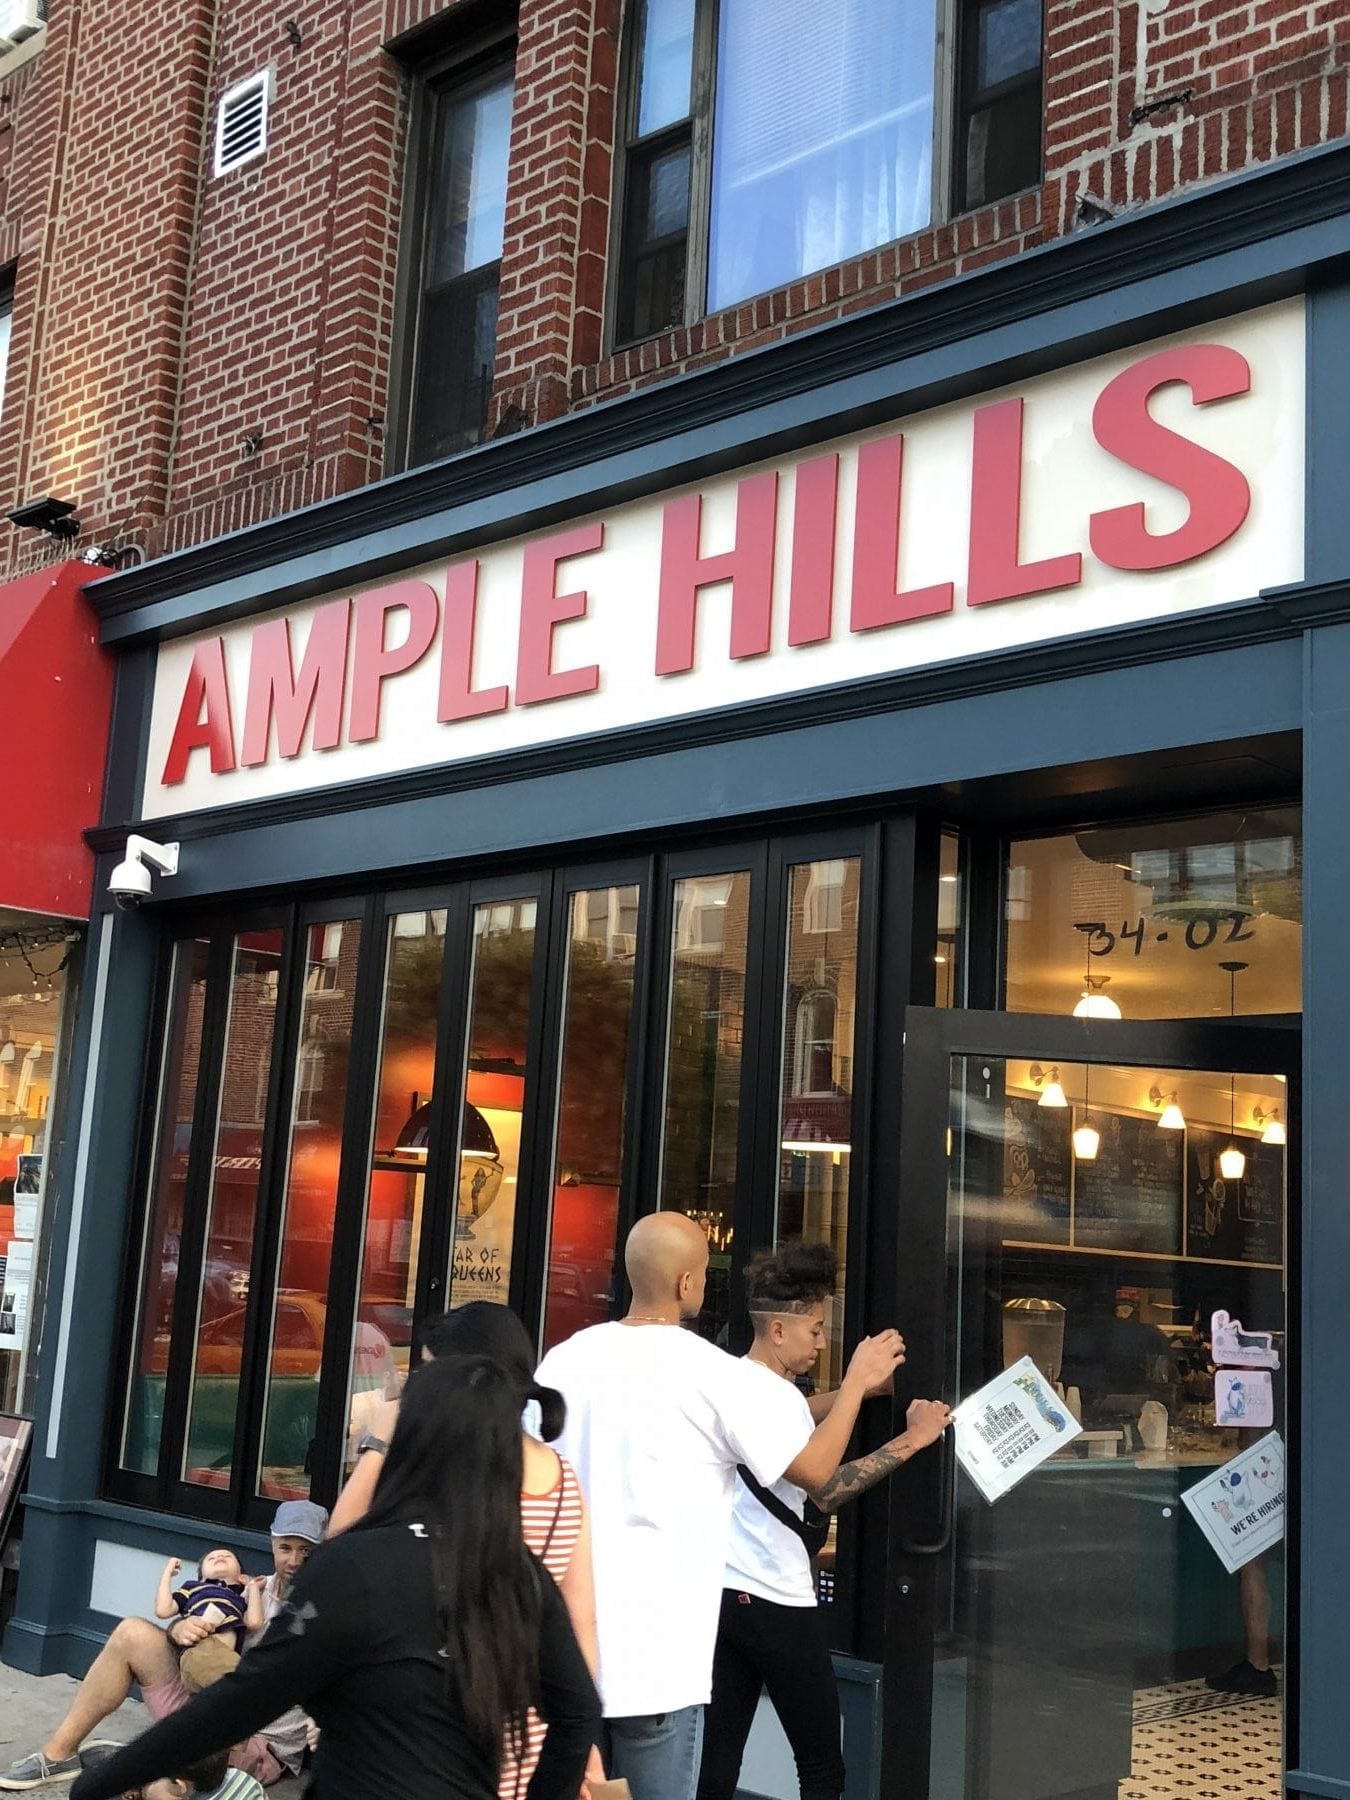 Ample Hill